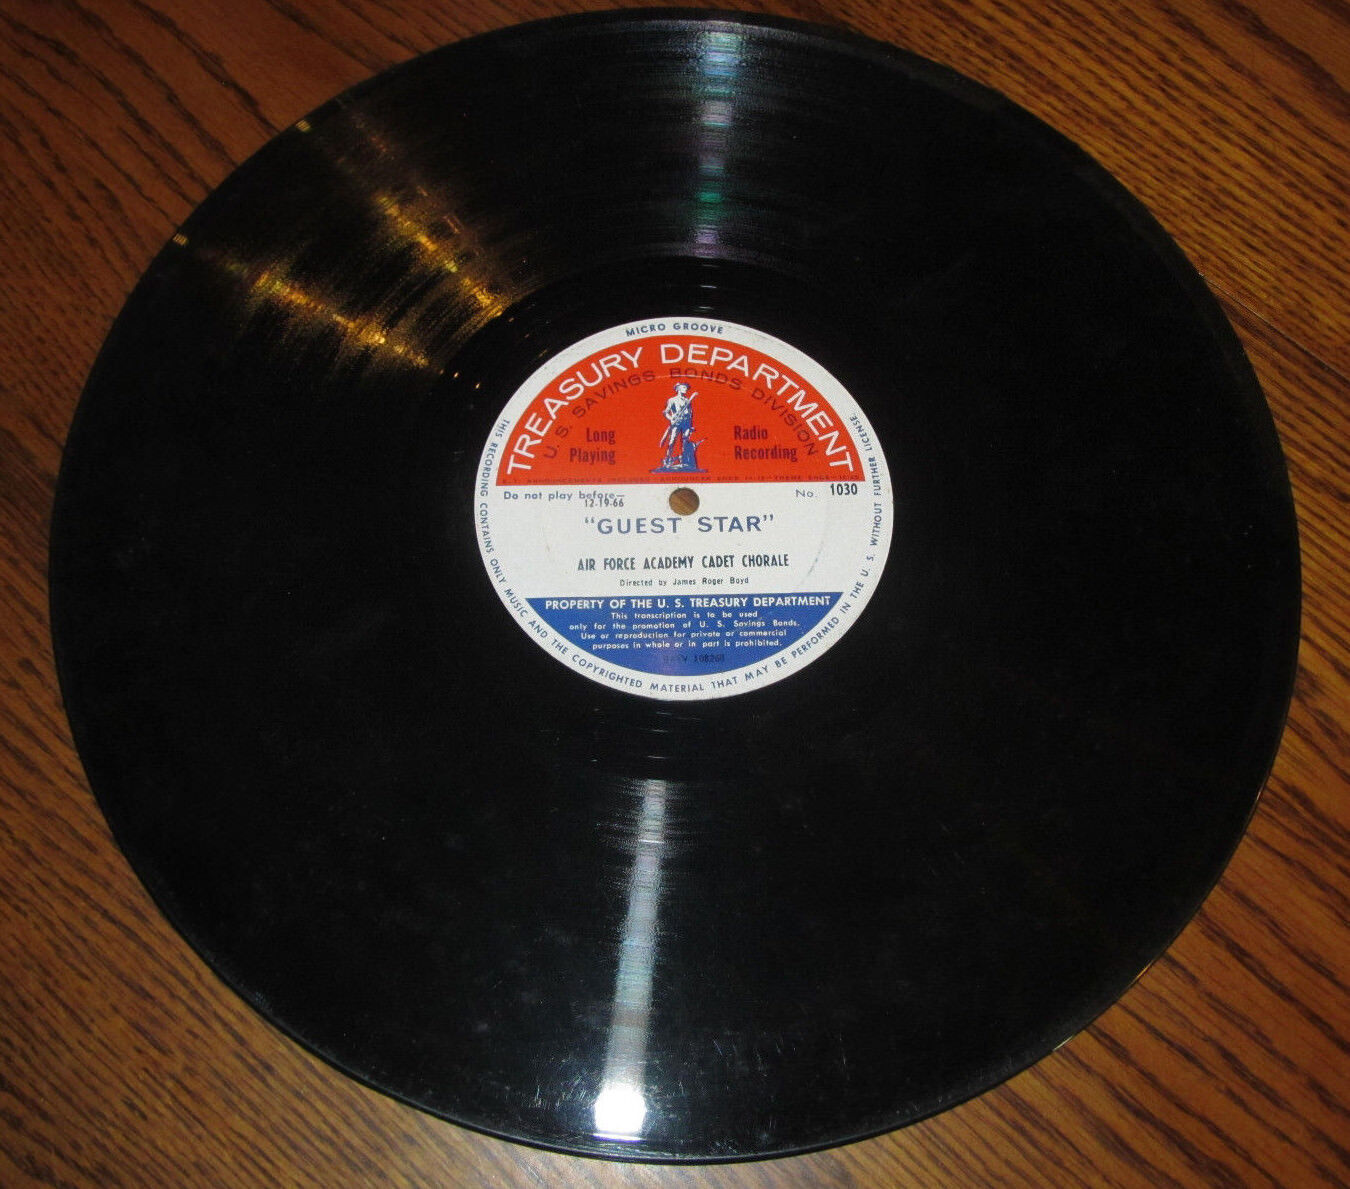 Record Vinyl Album Air Force Academy Band and Cadet Chorale Guest Star Radio